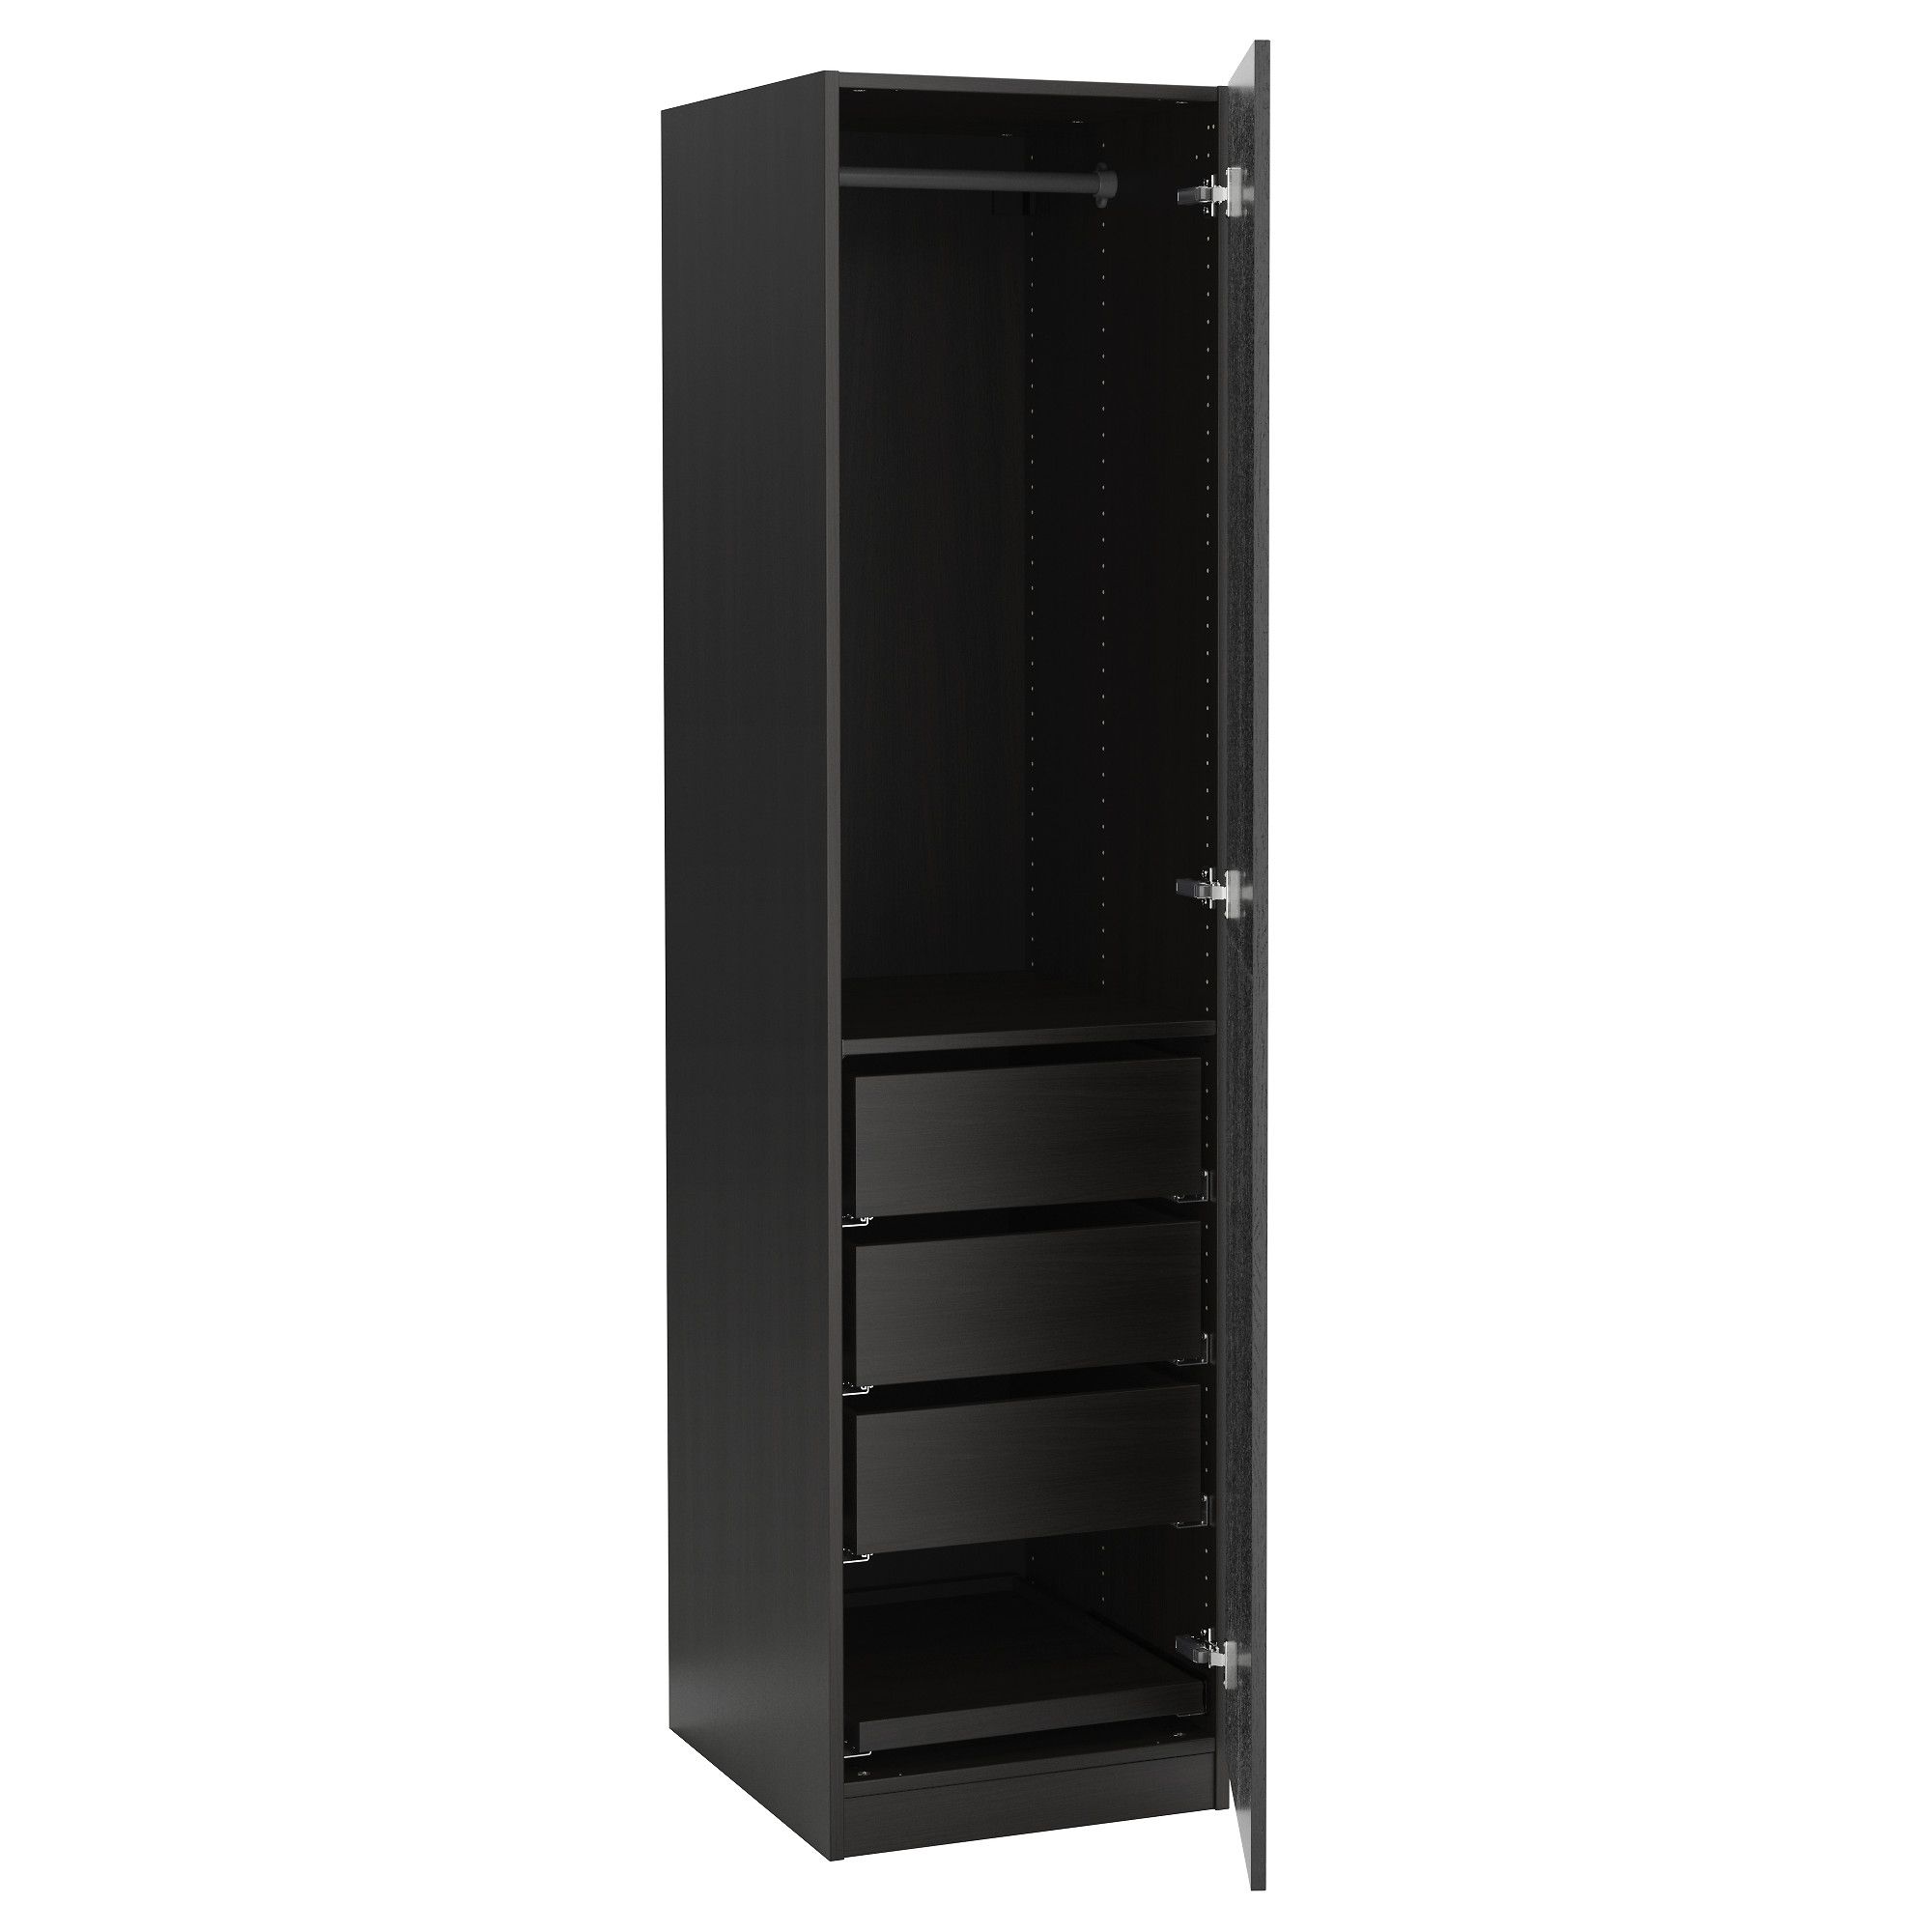 Wardrobe Design Imported Wardrobes In Delhi Design Your Own In Most Popular Small Single Wardrobes (View 11 of 15)